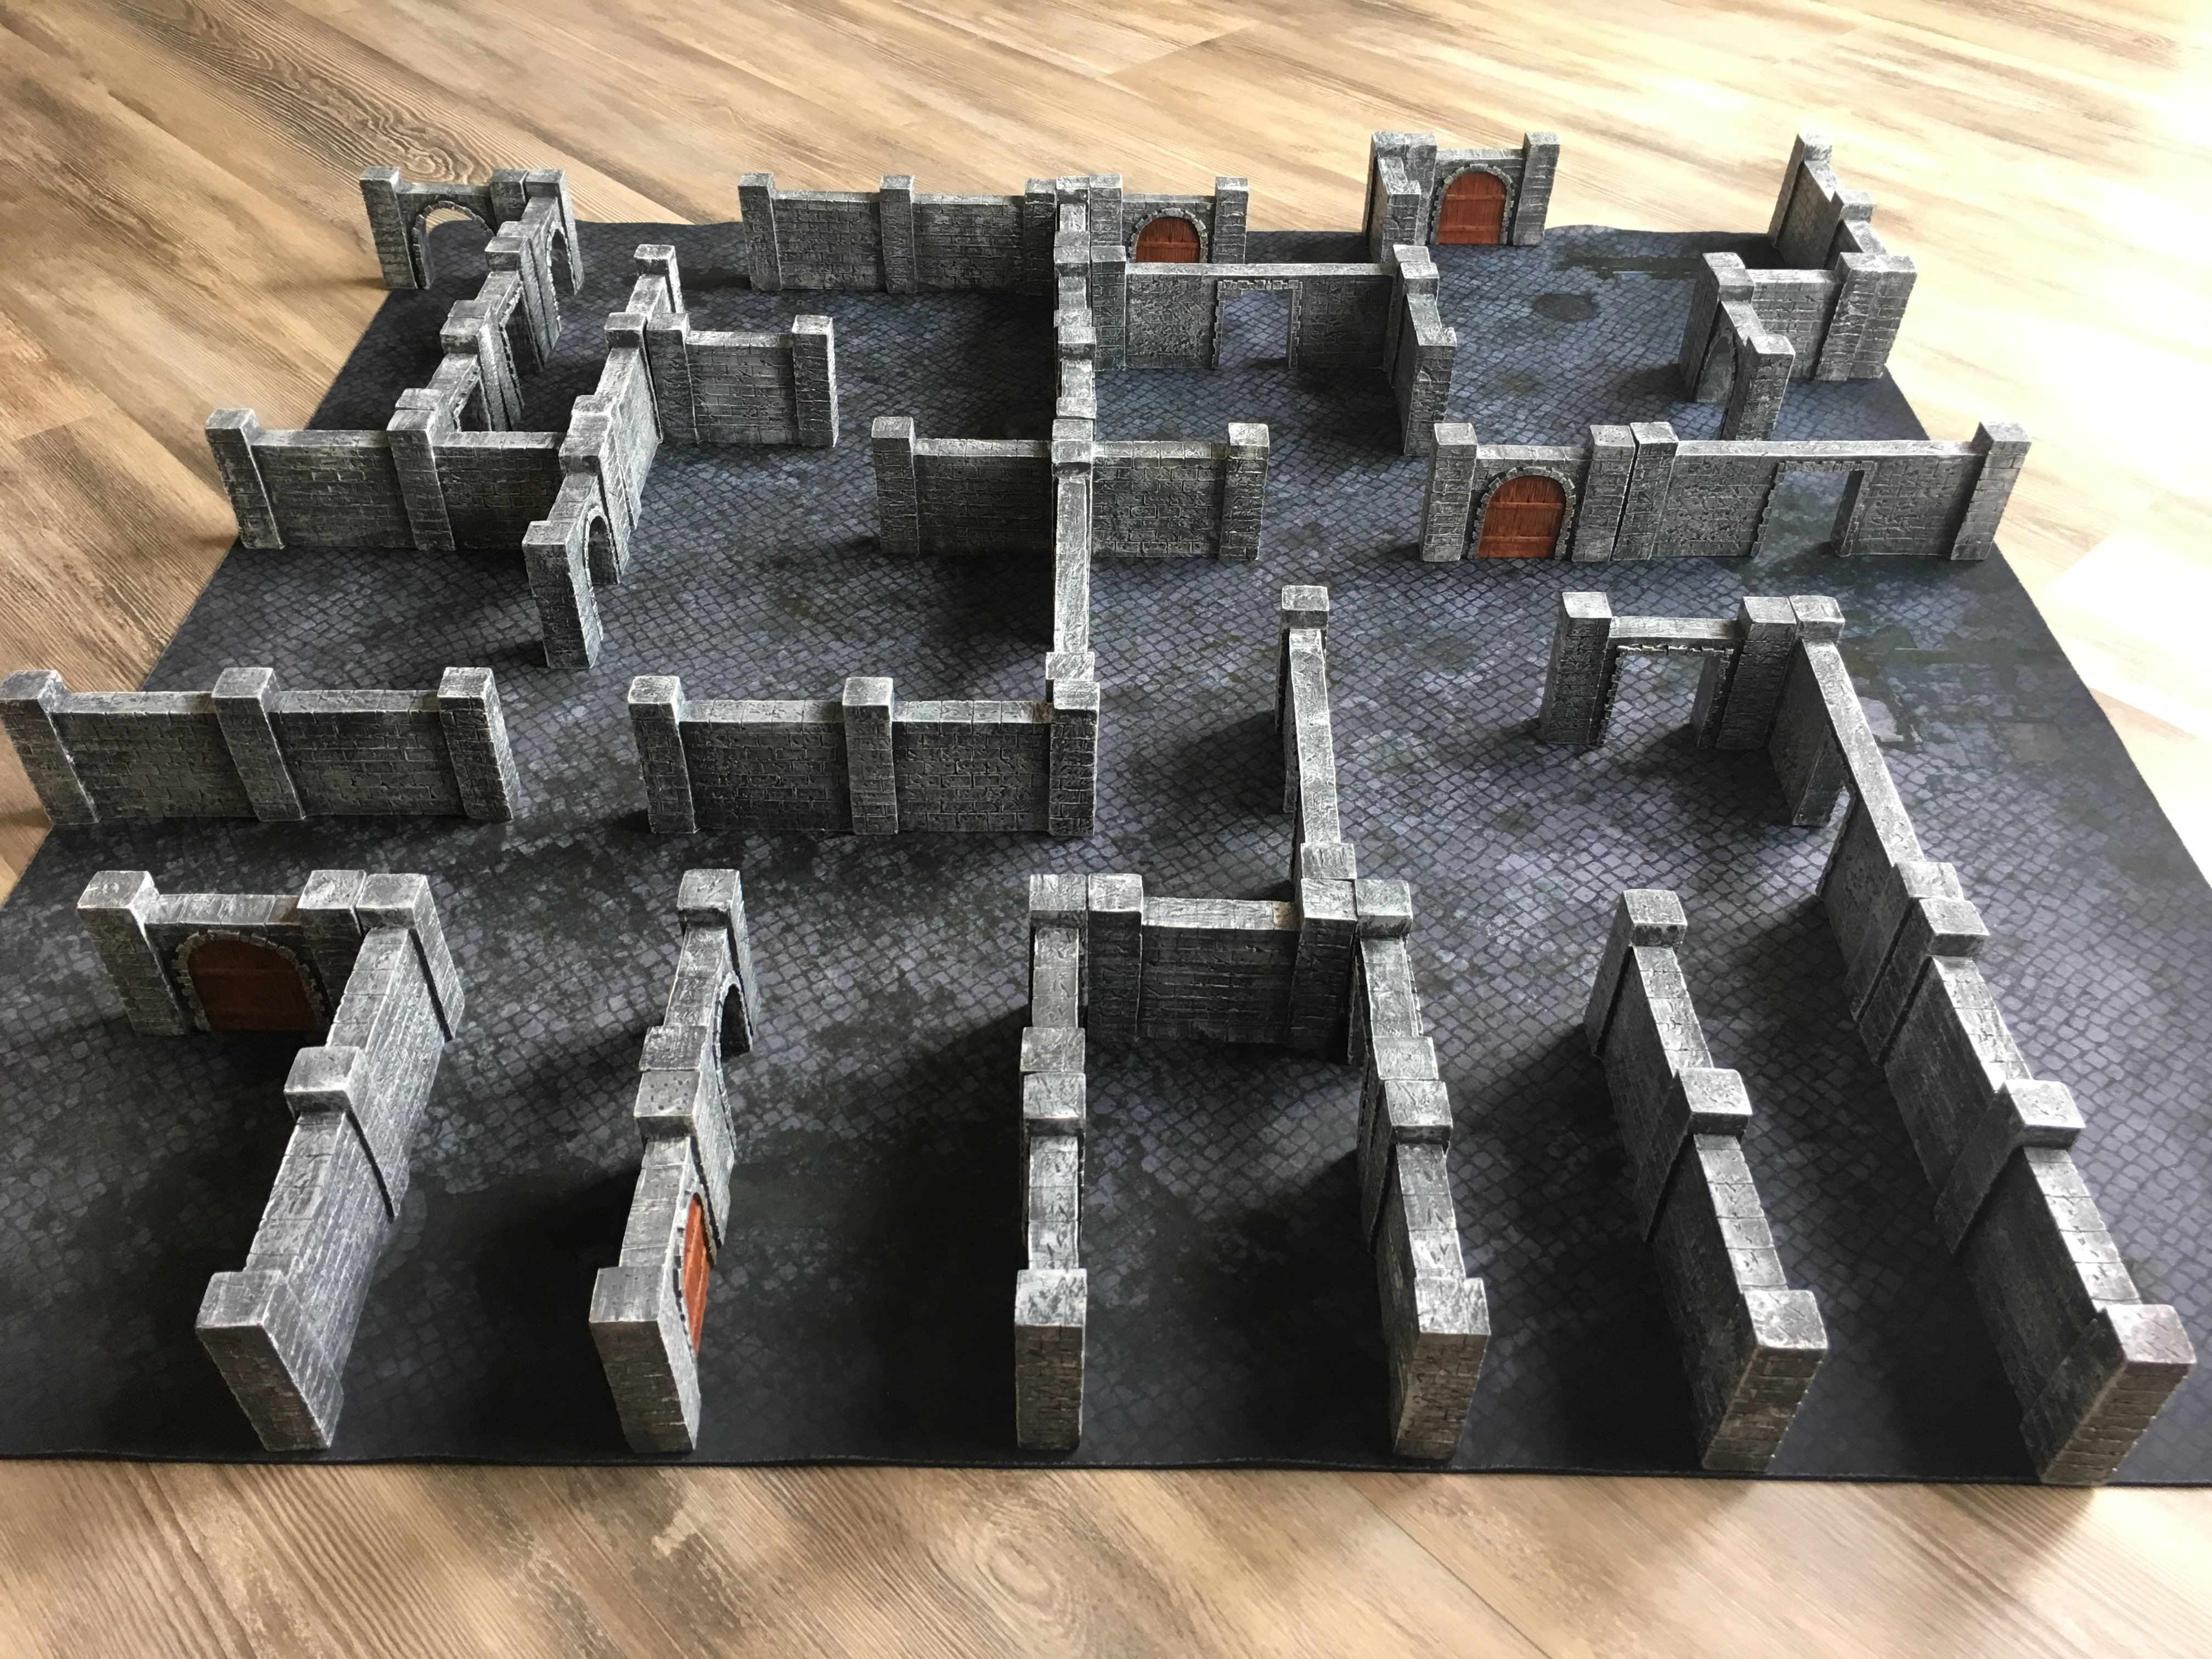 NEW TERRAIN: 40pcs of DUNGEON WALLS, all prepainted and ready to play.